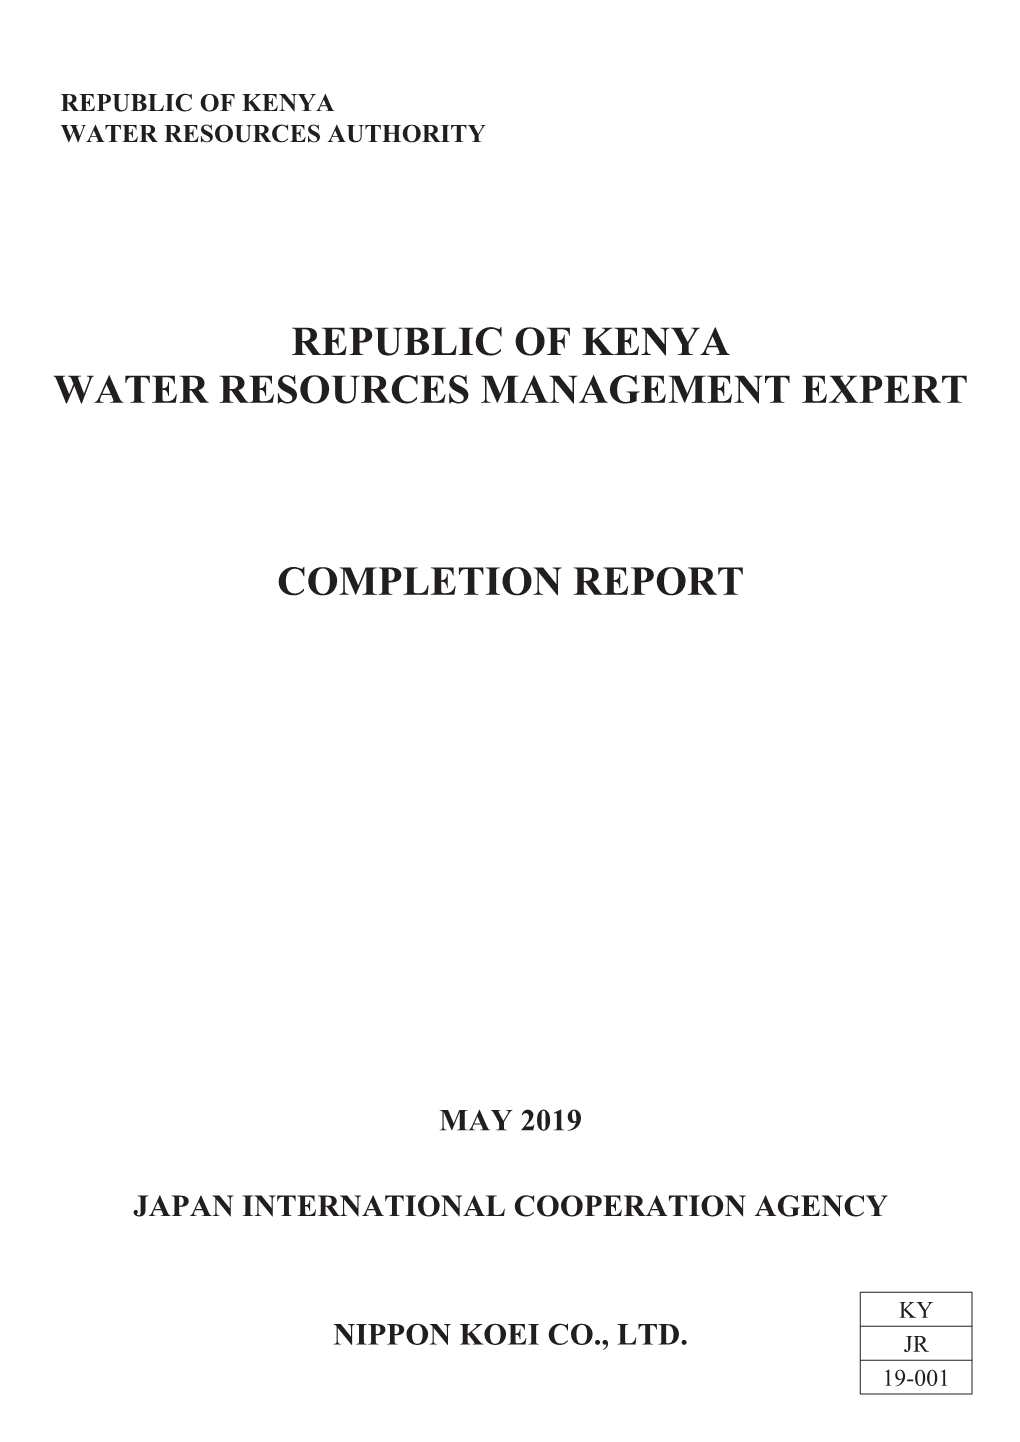 Republic of Kenya Water Resources Management Expert Completion Report